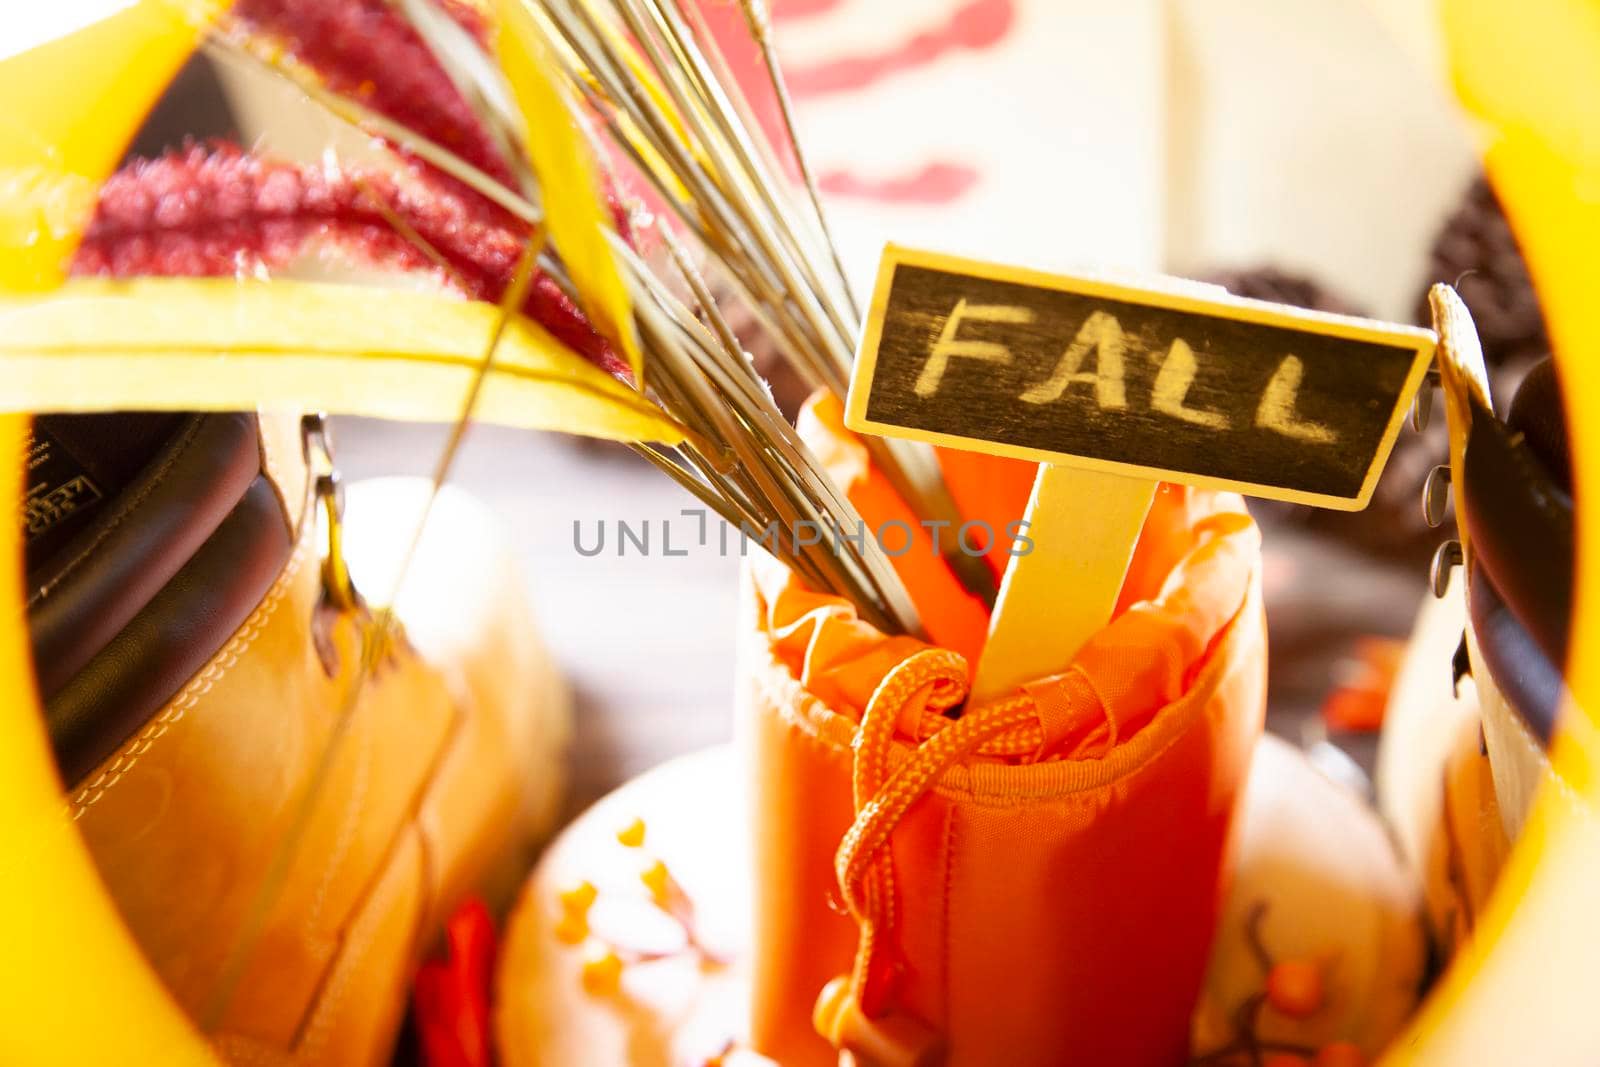 A "FALL" sign in a hunter orange pouch on a wooden slab next to orange and red berries and leaves between boots with a red hand turkey in the background framed in yellow